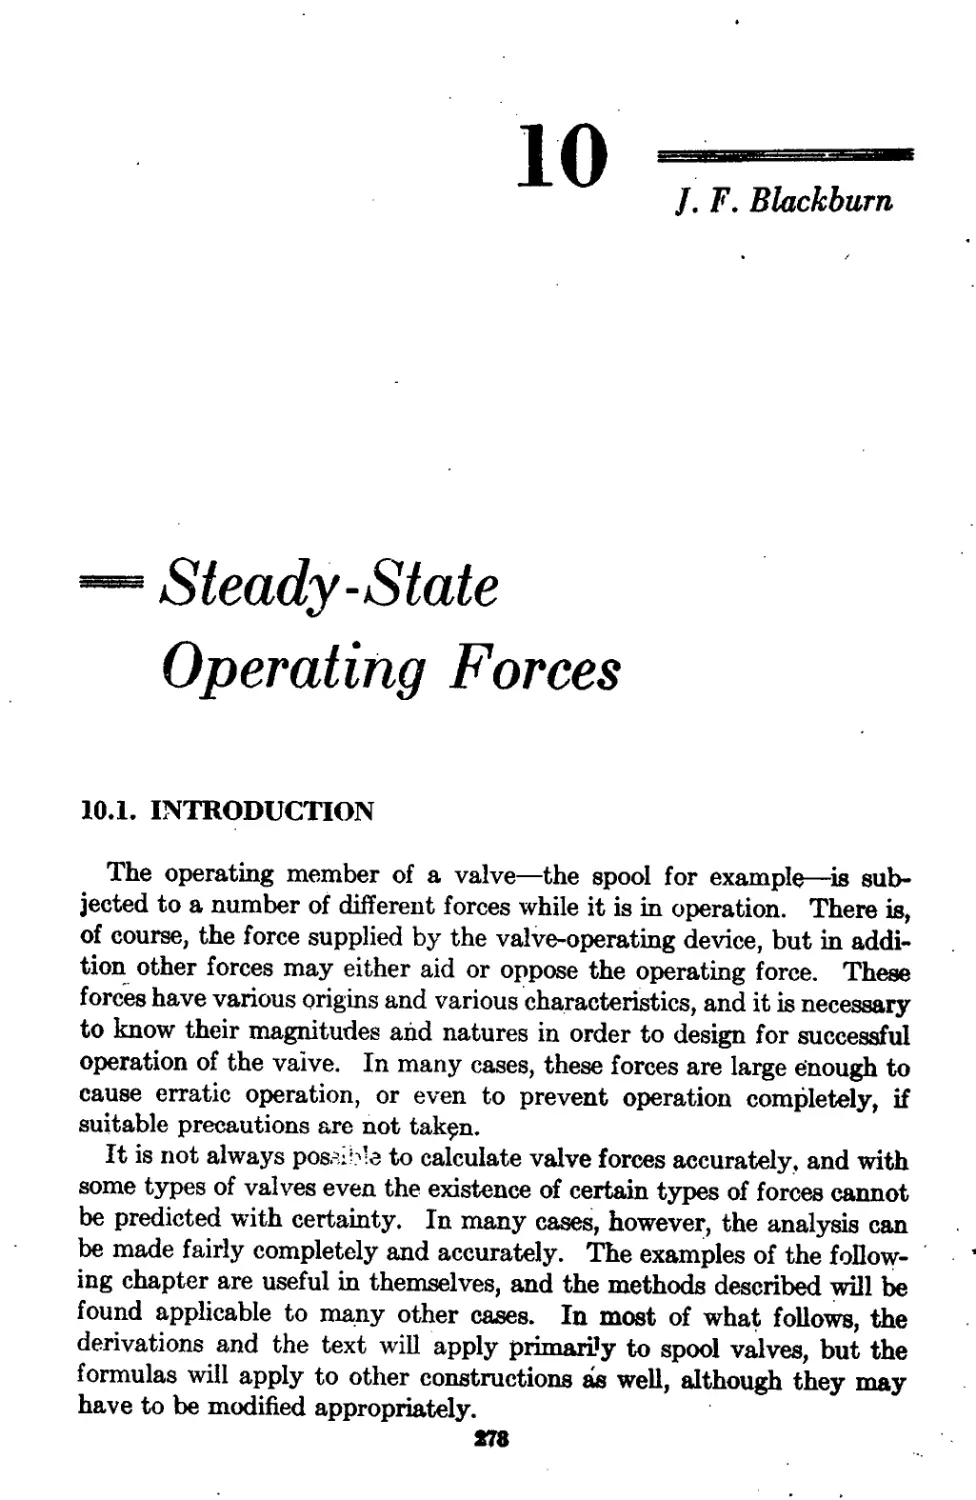 Chapter 10 Steady-State Operating Forces: J. F. Blackburn